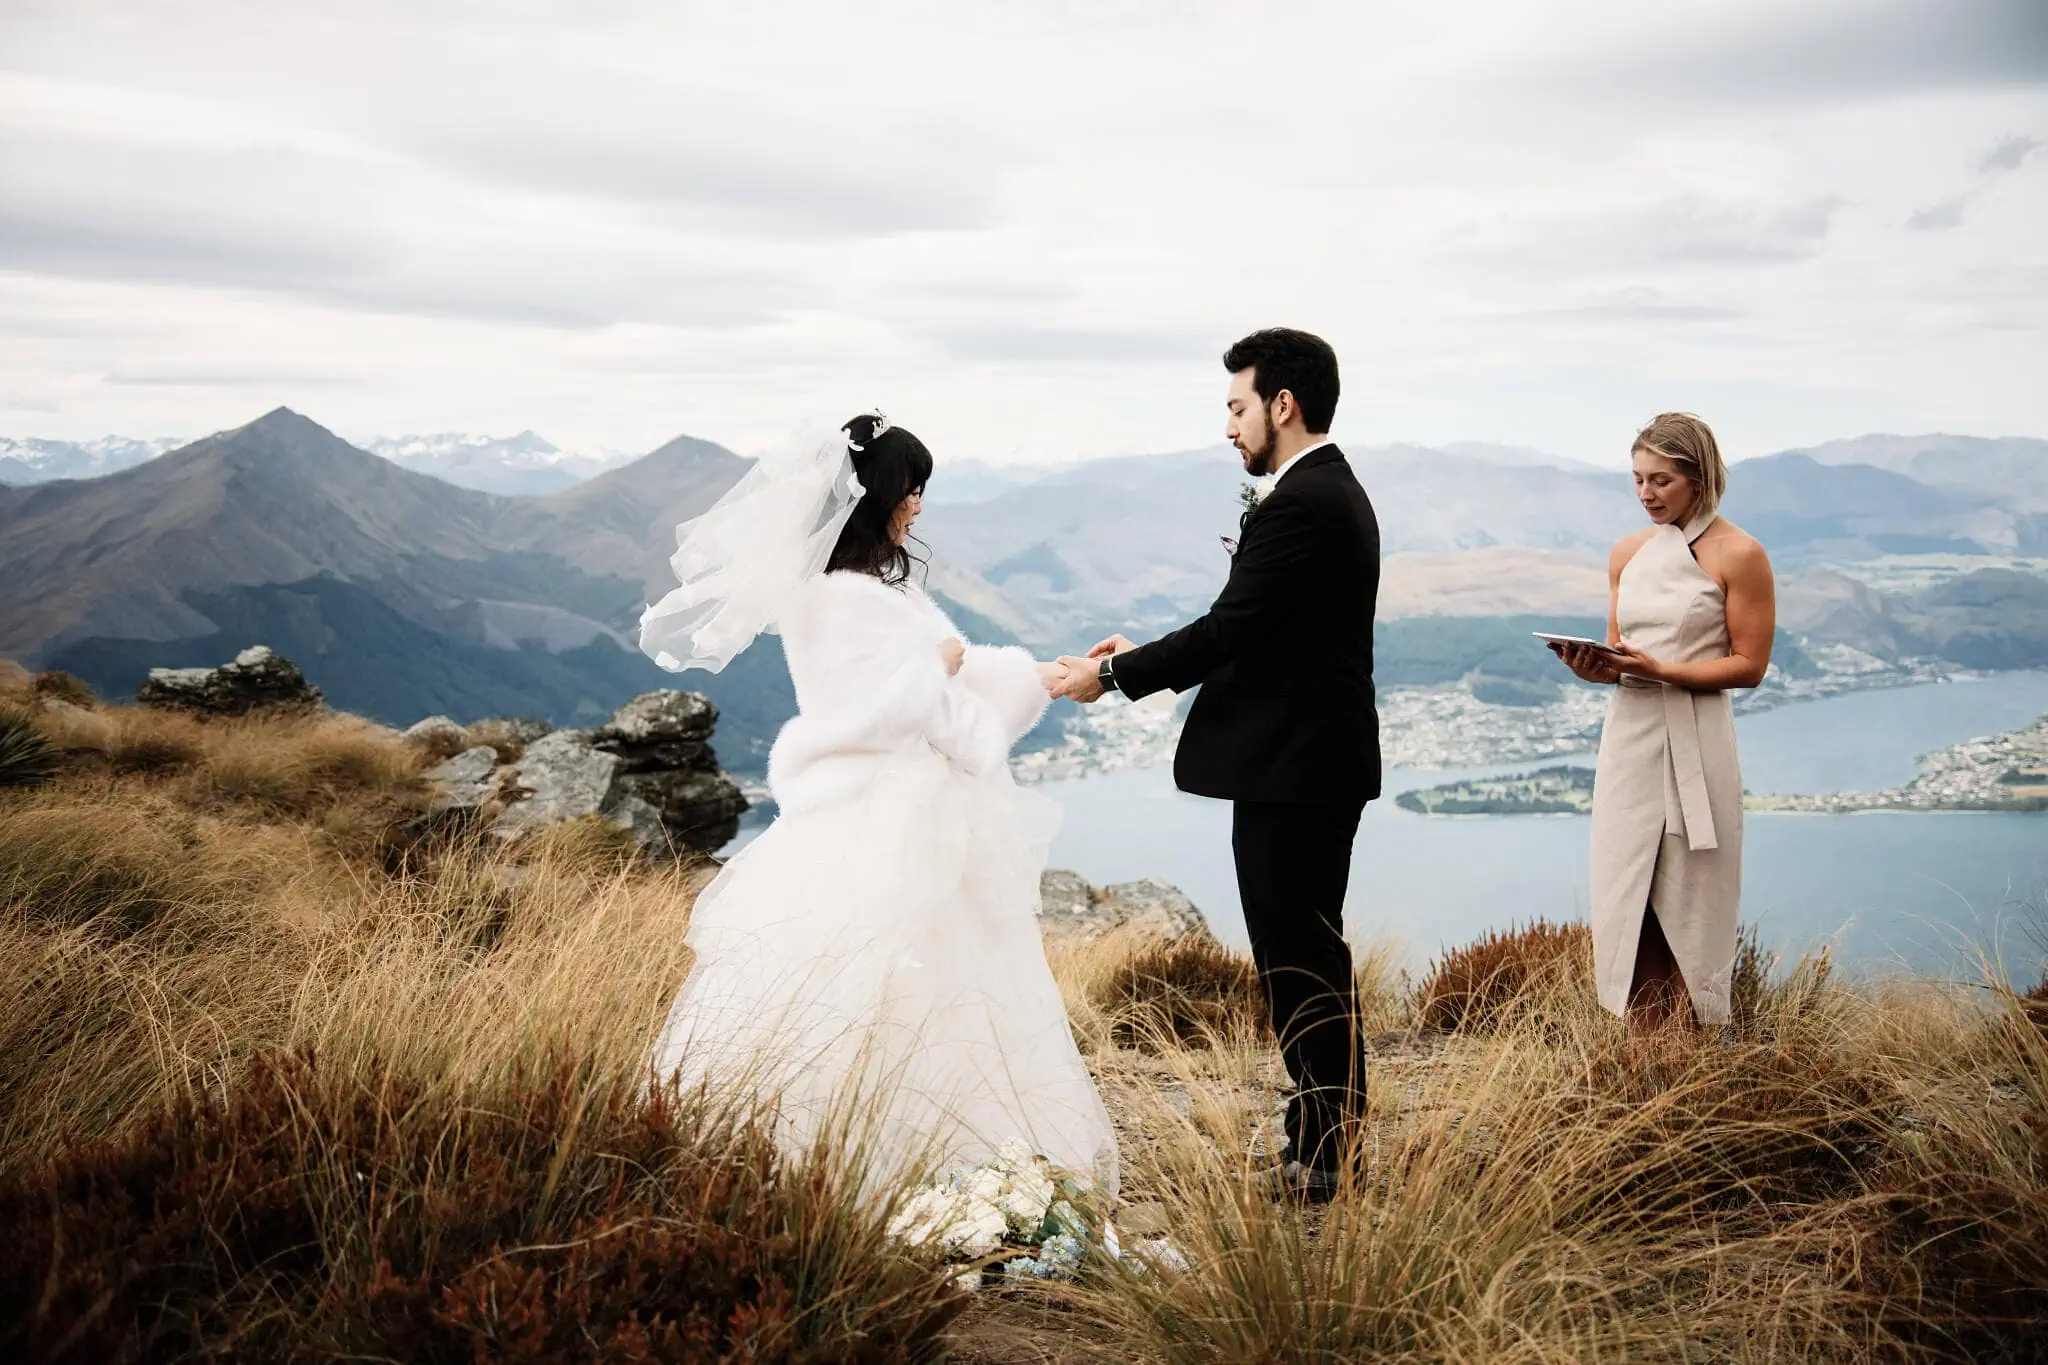 Carlos and Wanzhu share intimate vows atop Cecil Peak in Queenstown, New Zealand.